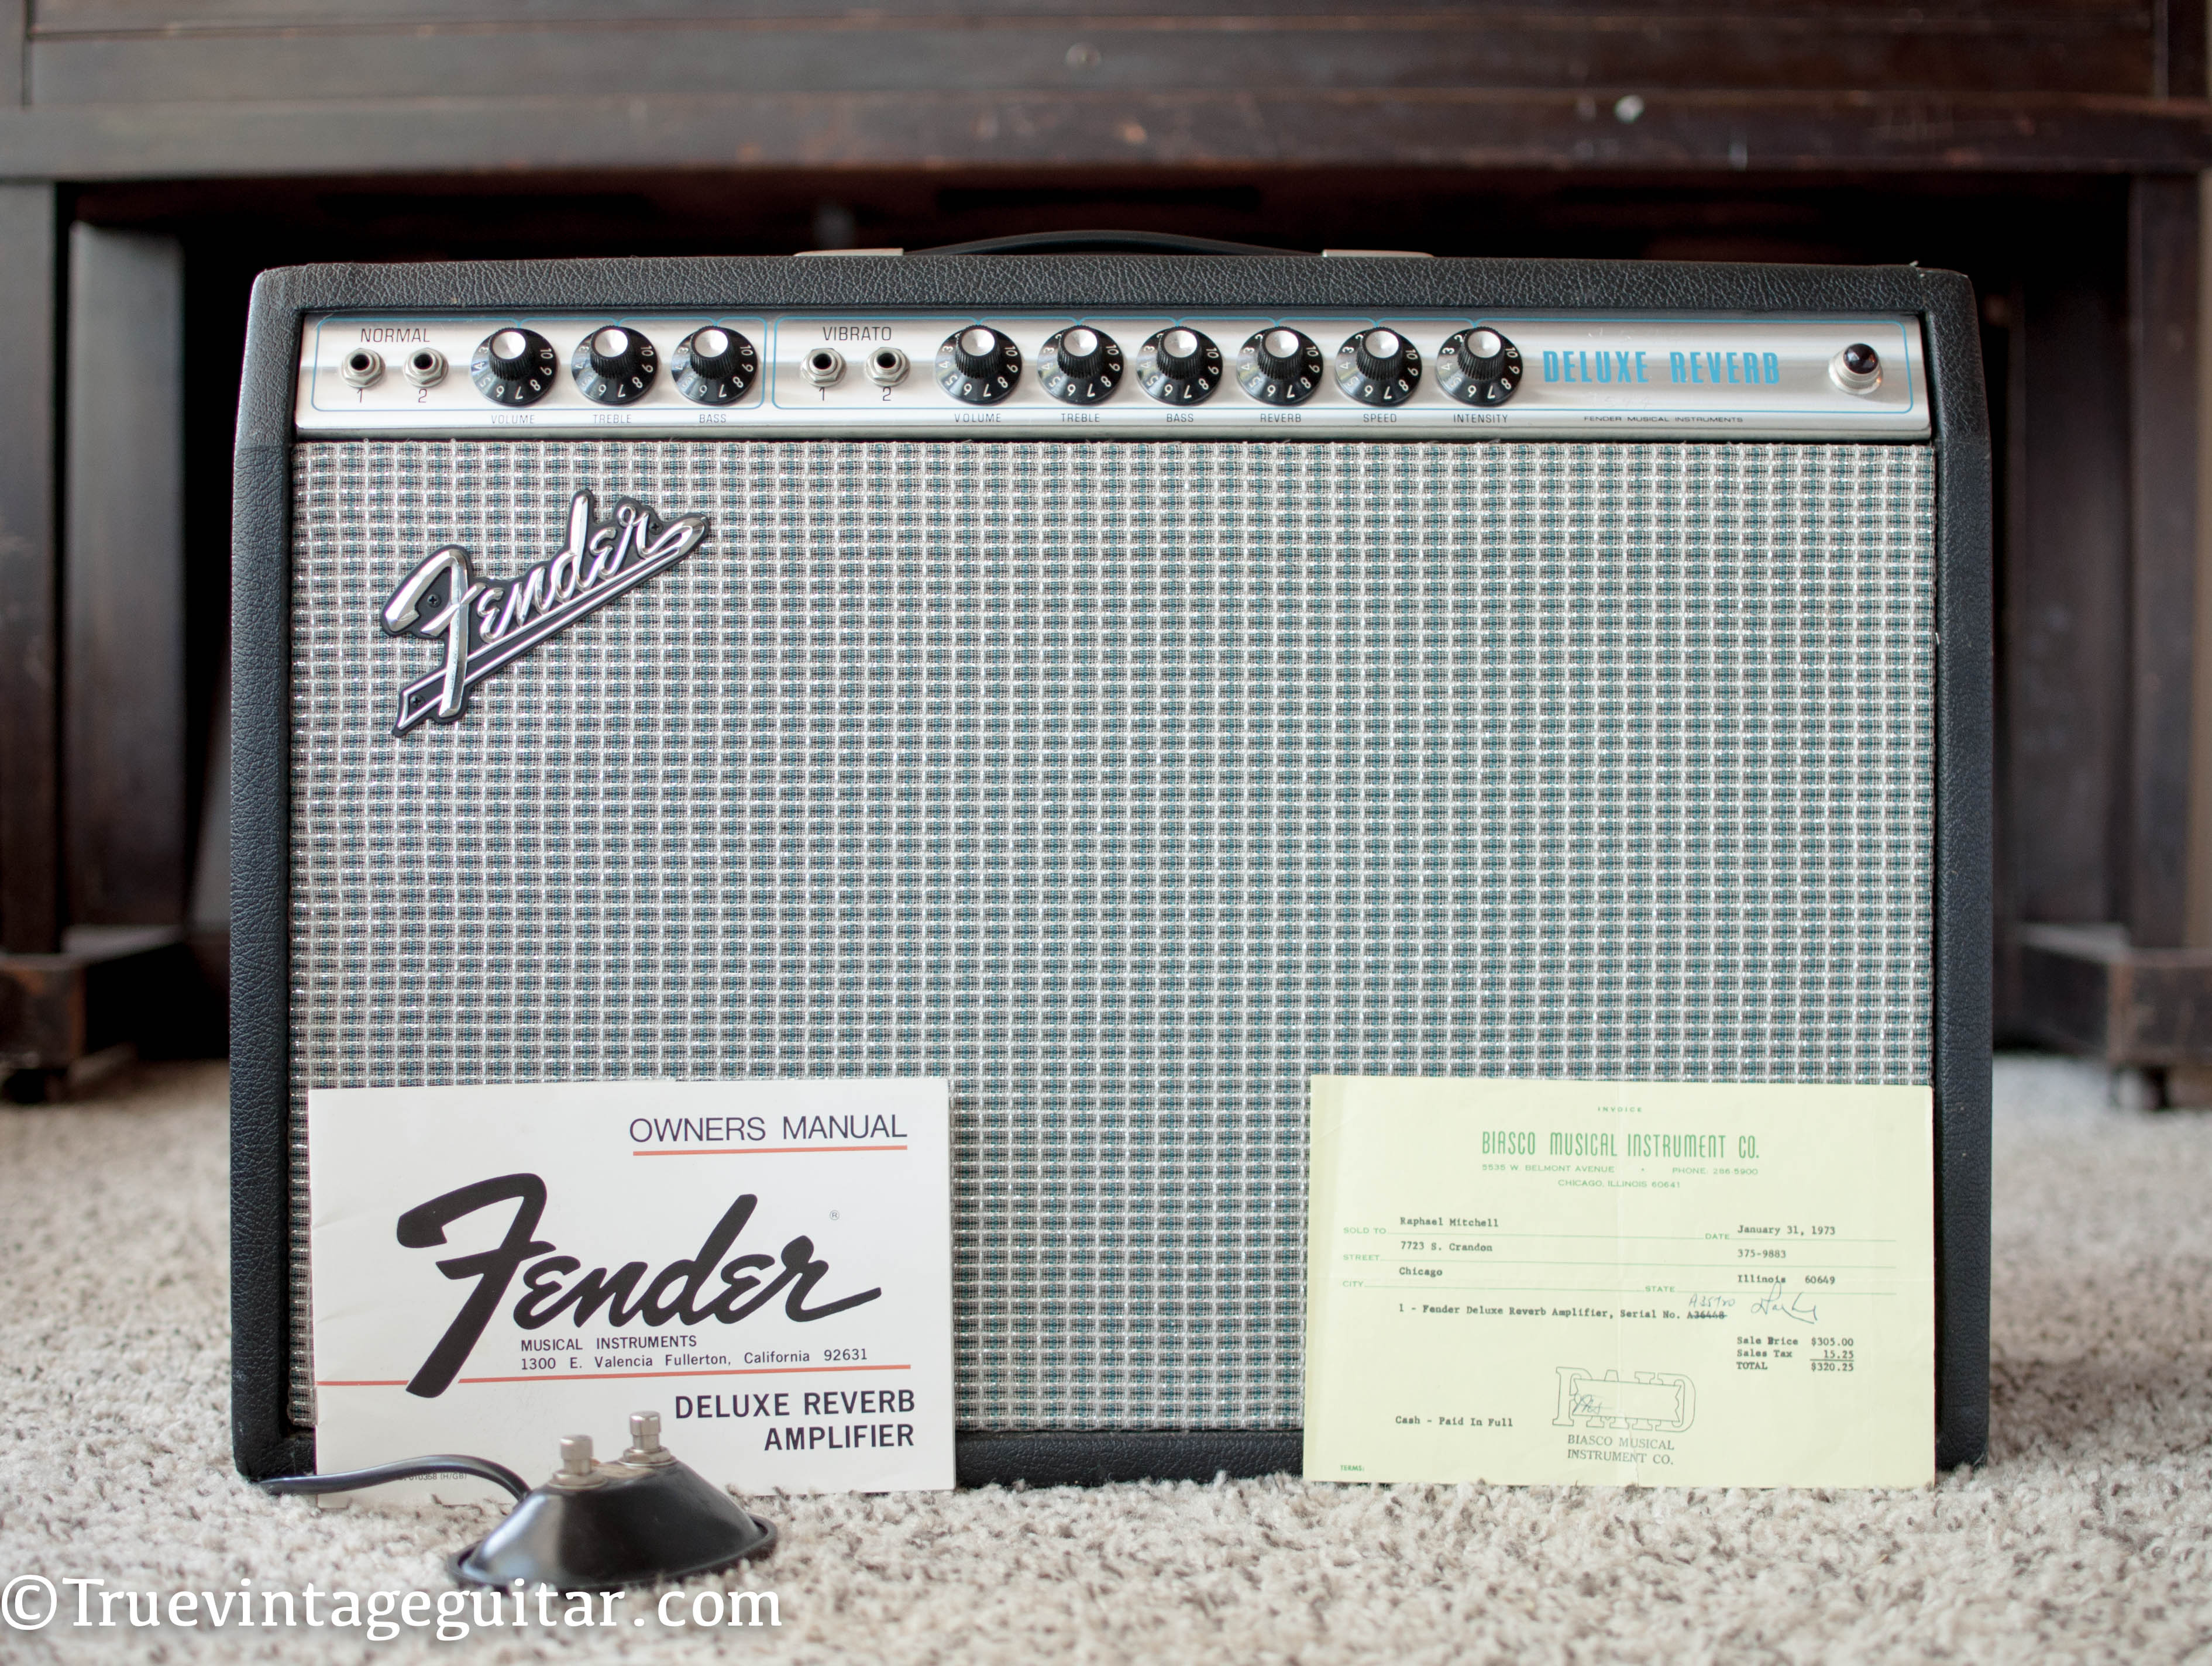 Fender Deluxe Reverb silver faceplate guitar amp 1972